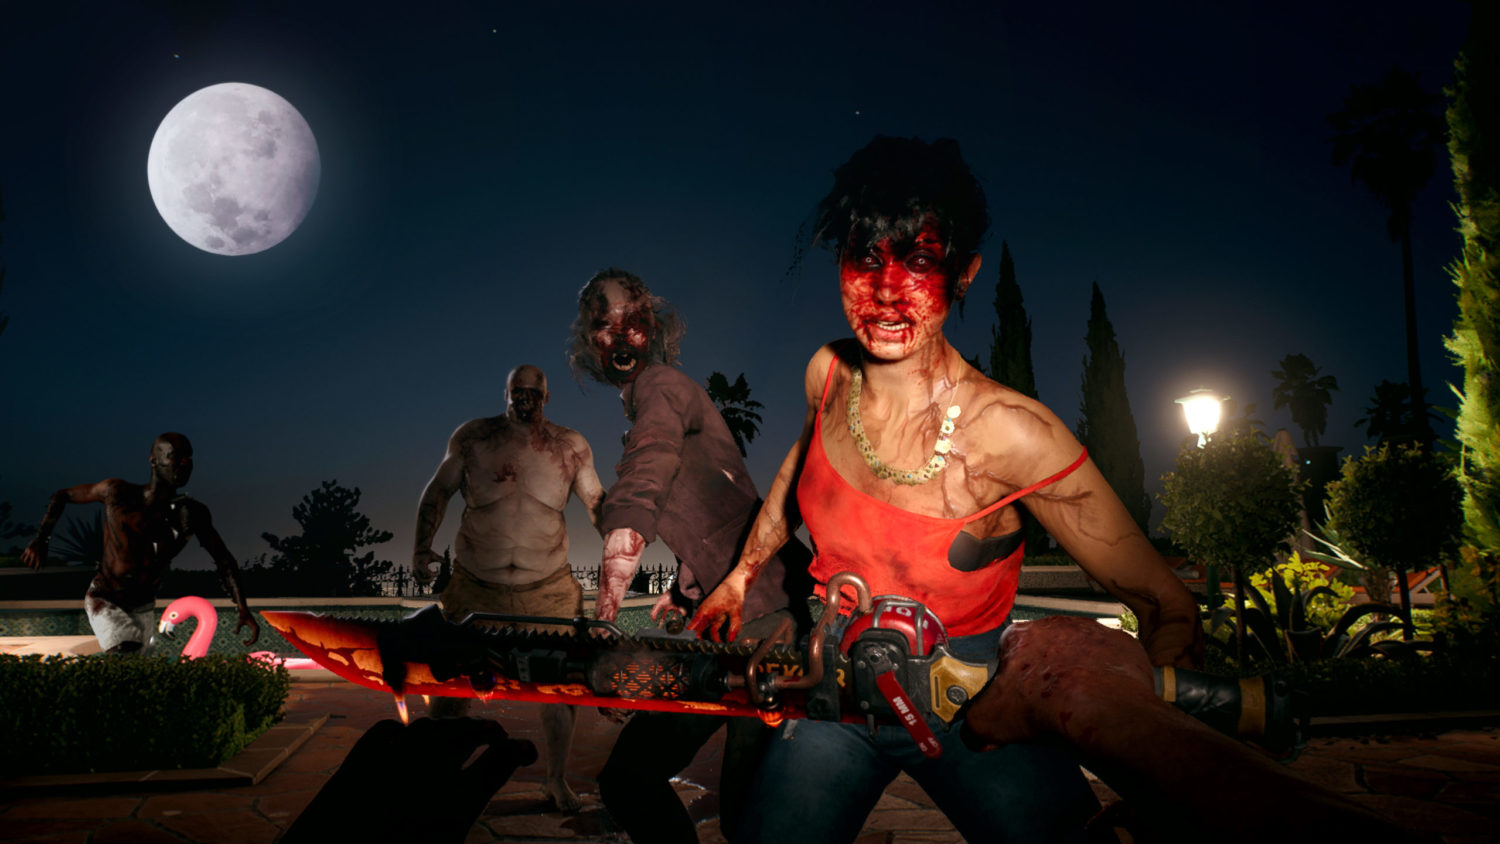 Dead Island 2 Review - A Fun Day in LA - Game on Aus